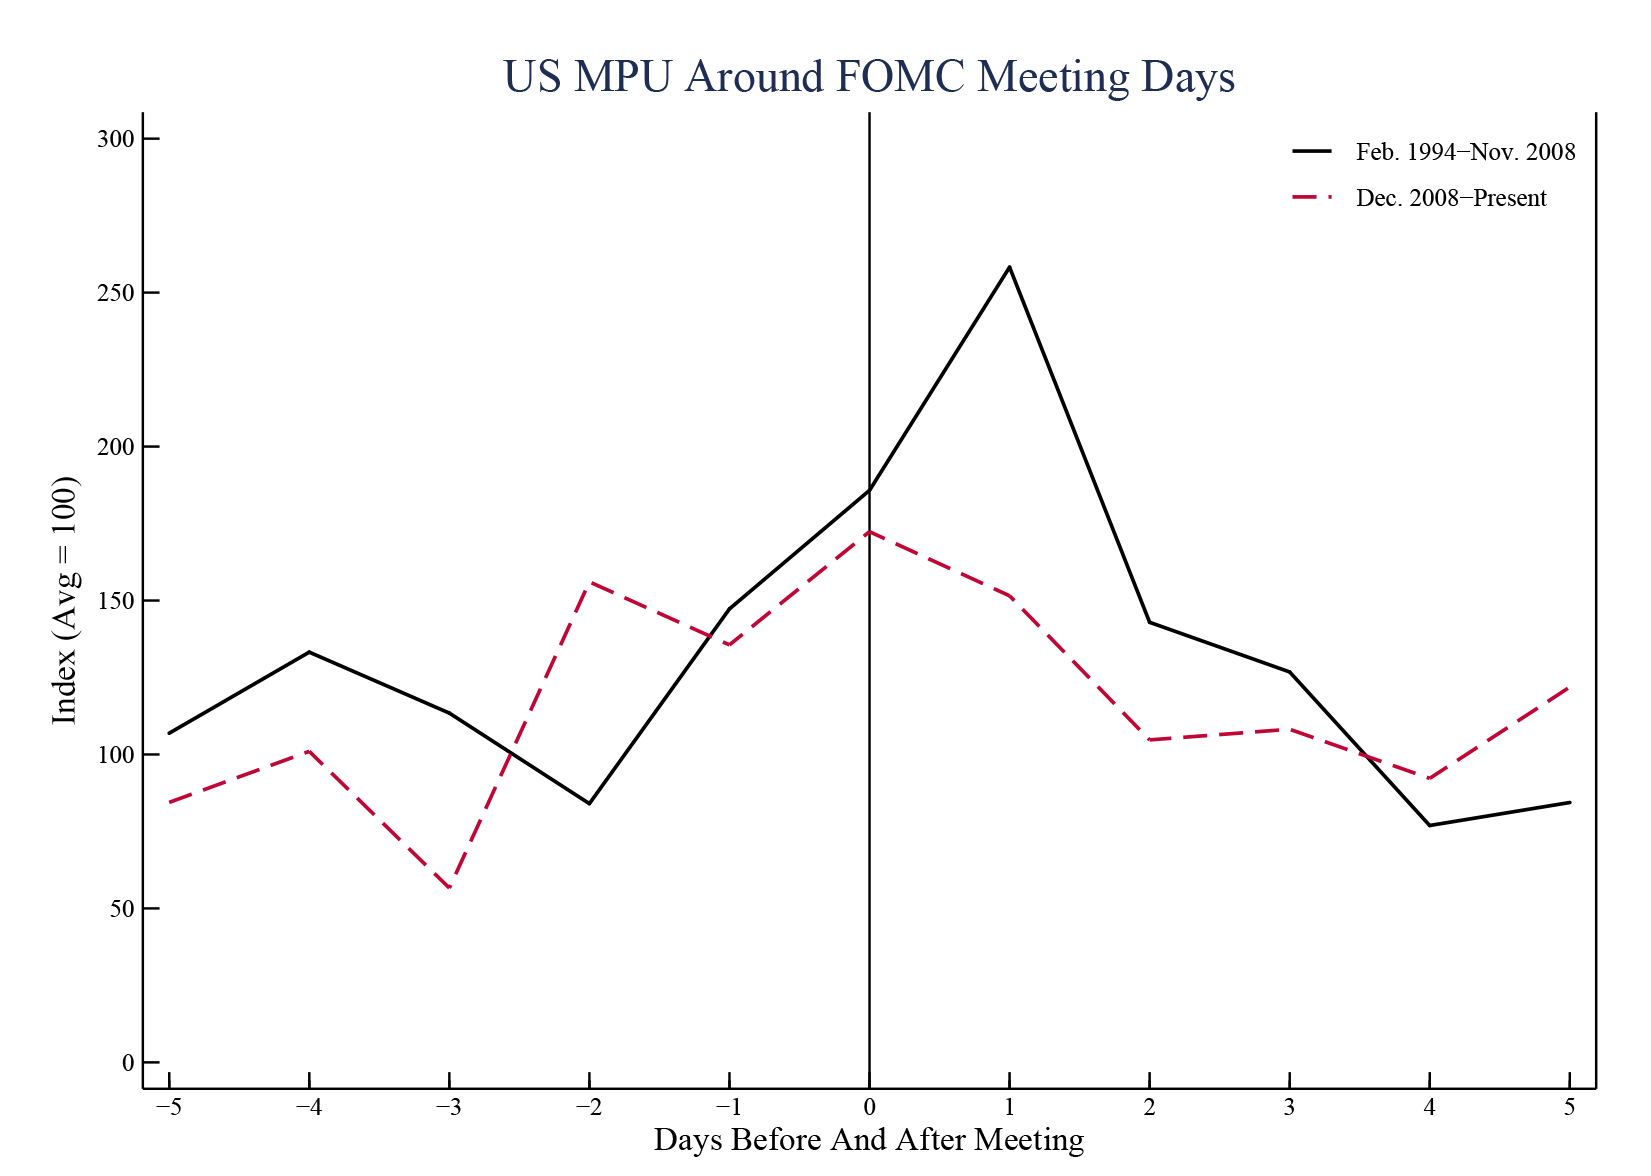 Figure 6. MPU Index Around FOMC Meetings. See accessibile link for data description.